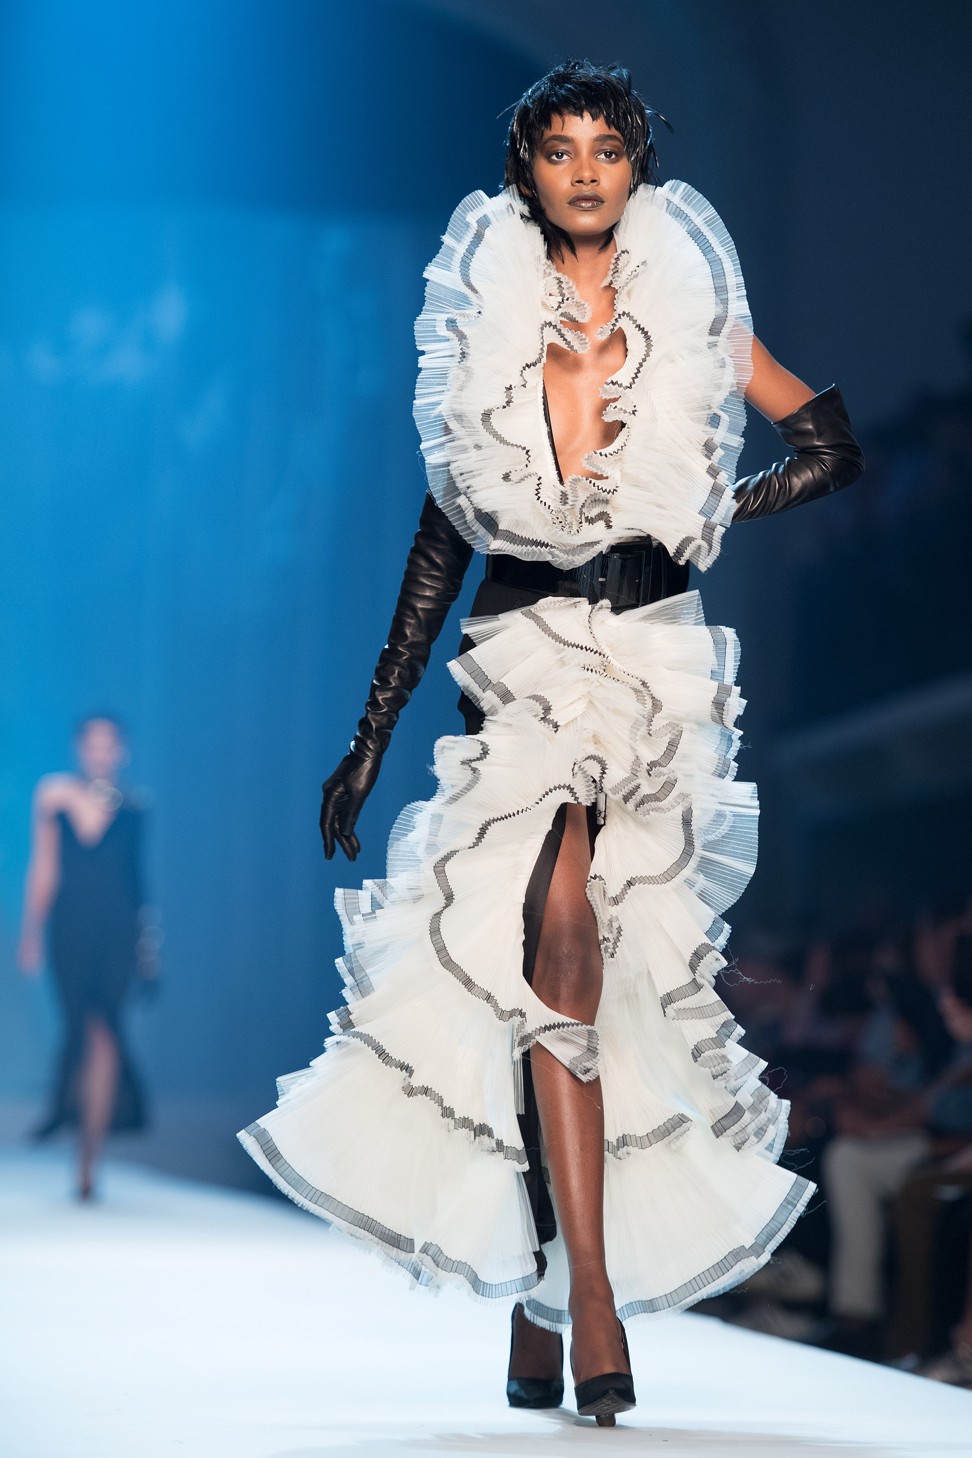 A model presents a look made of ruffles from the Haute Couture collection by French designer Jean-Paul Gaultier in Paris. Photo: EPA